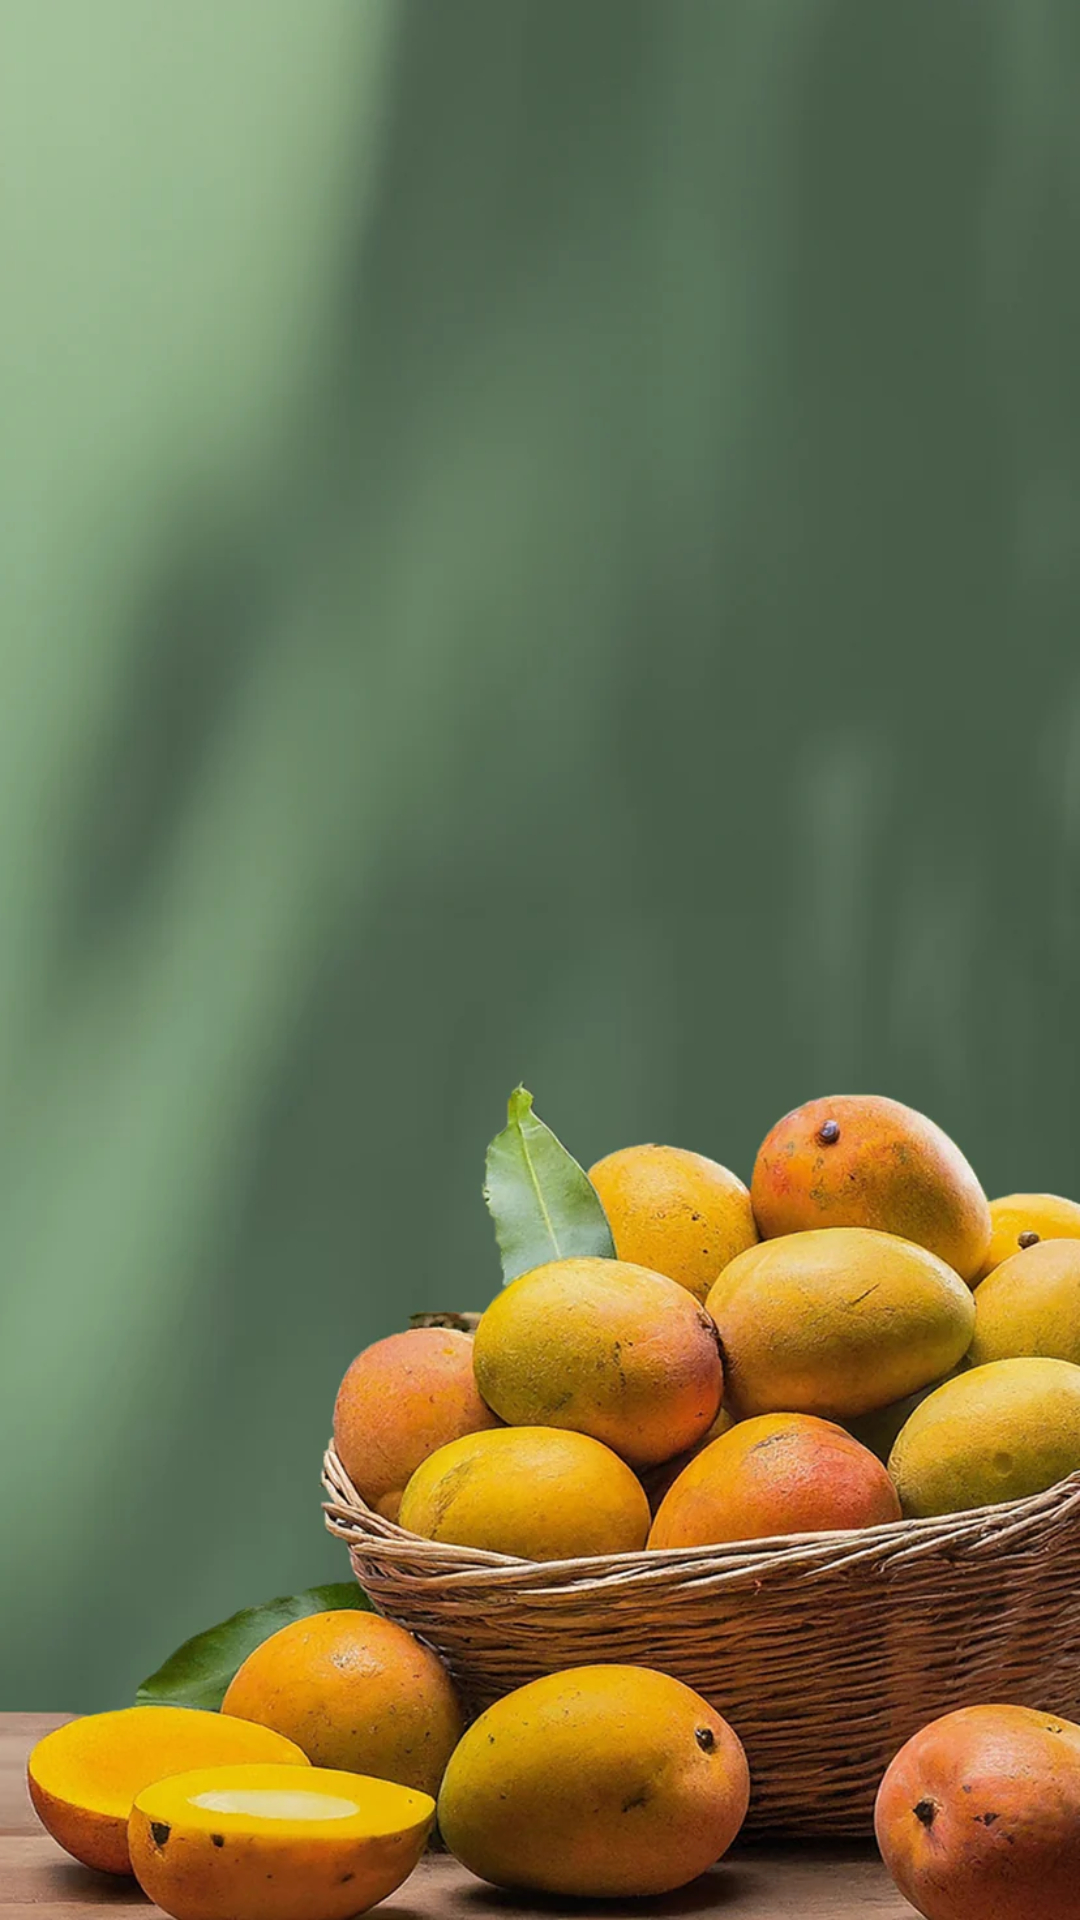 5 simple DIY techniques to remove chemicals from mangoes